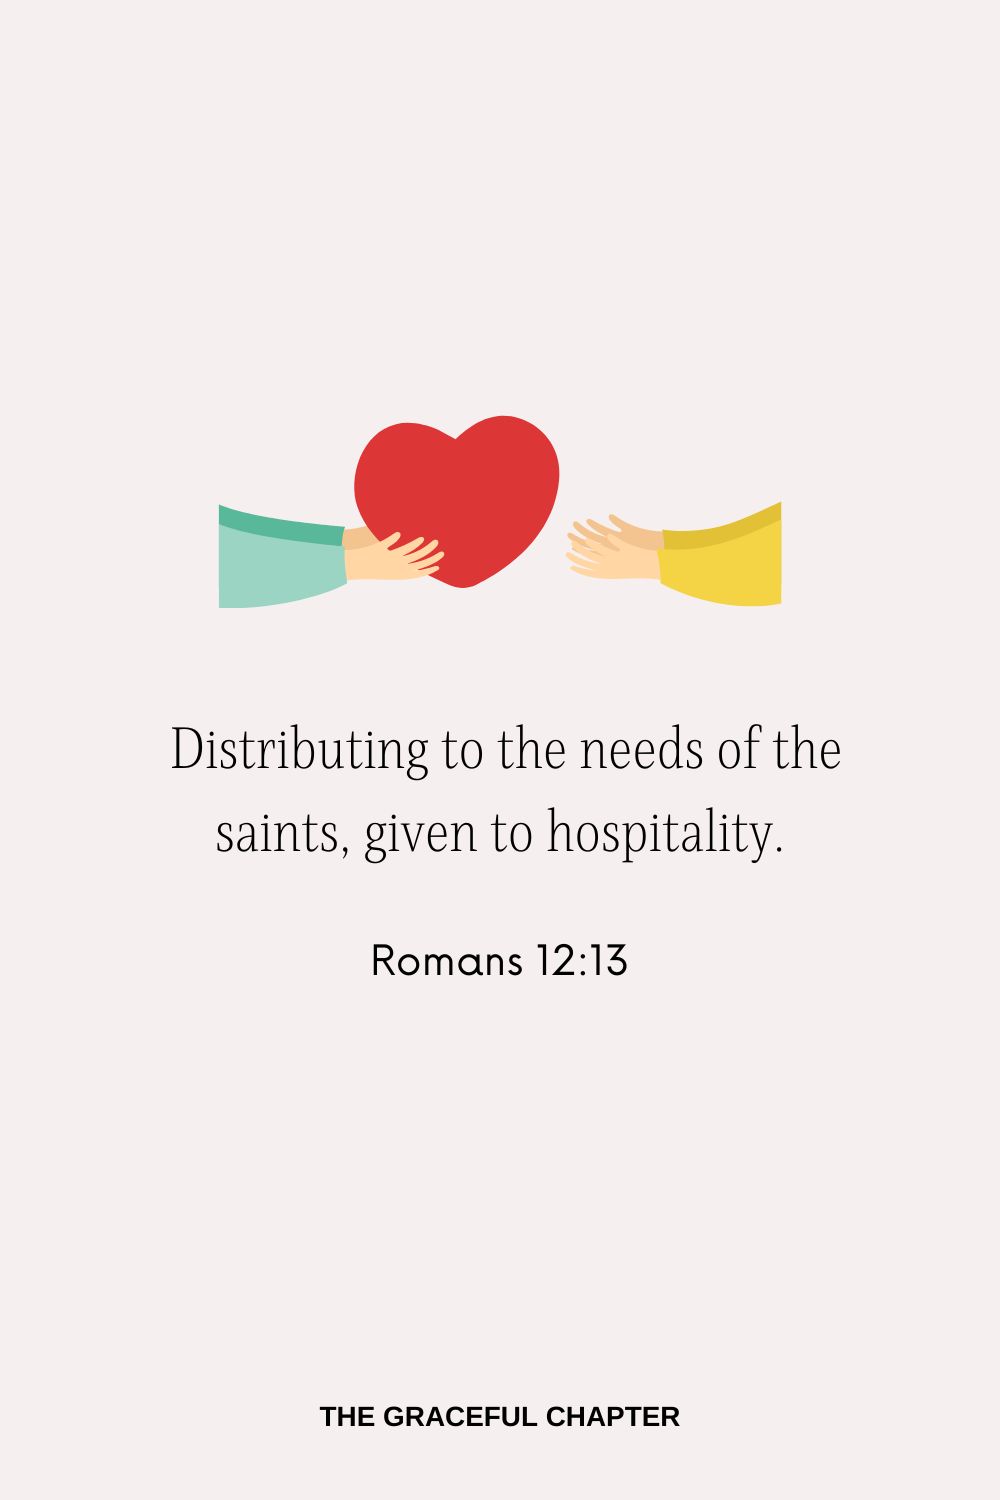  Distributing to the needs of the saints, given to hospitality. Romans 12:13
Bible Verses About Giving